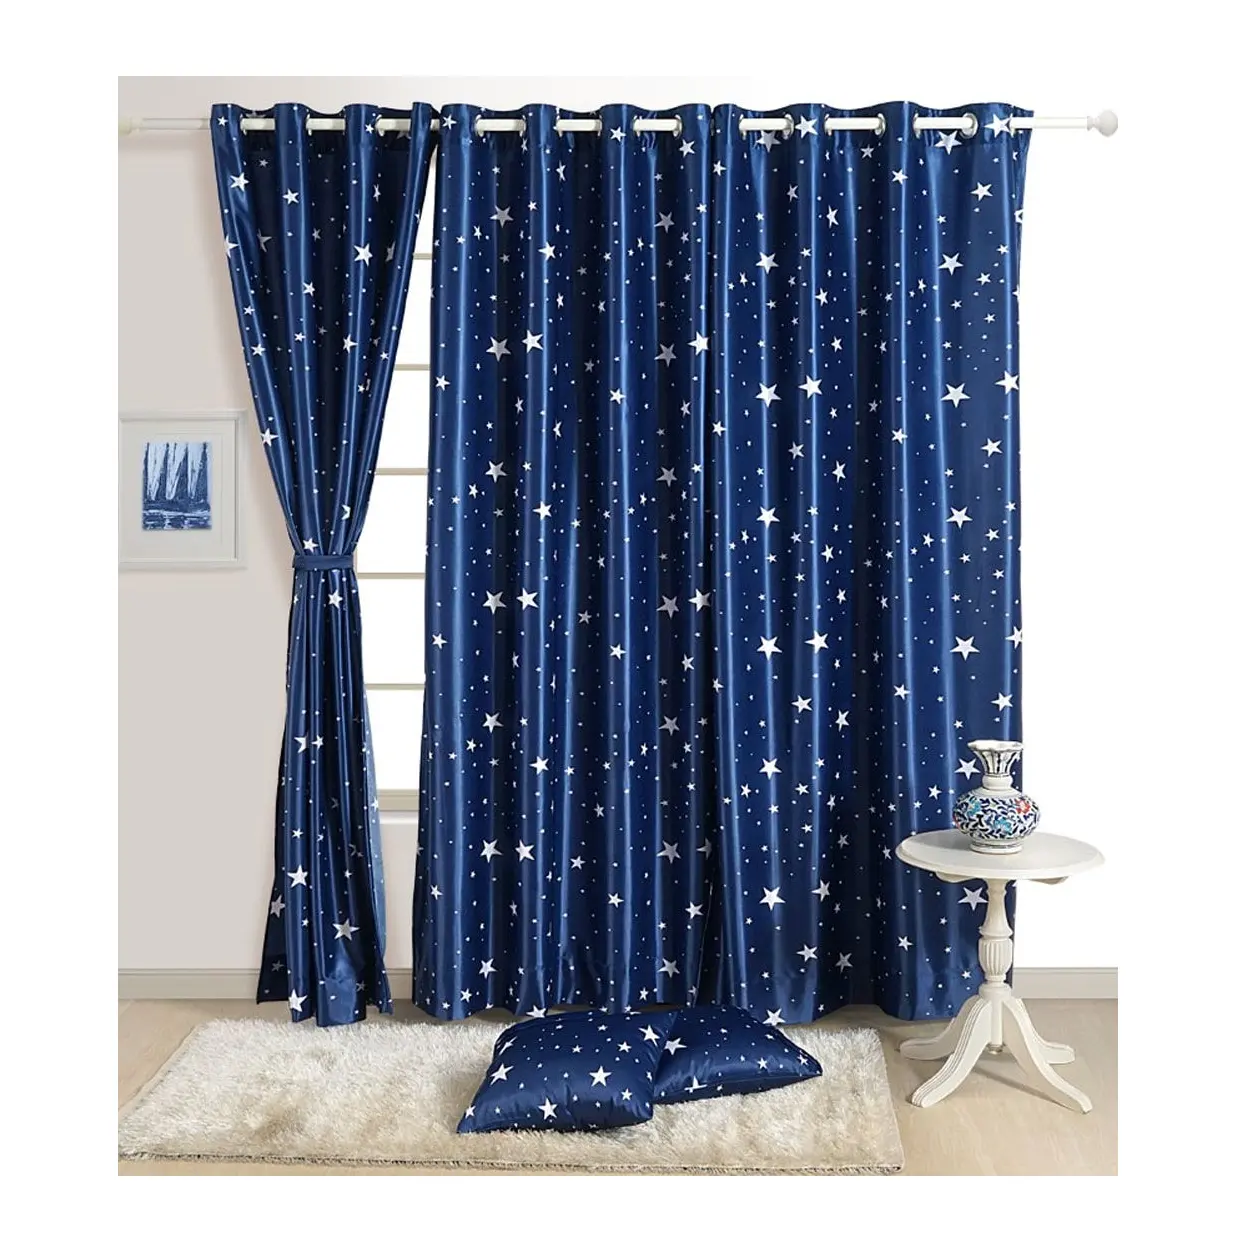 Direct Factory Supply Home Stars Omega Curtains with Top Grade Material Made For Home Decoration By Indian Exporters